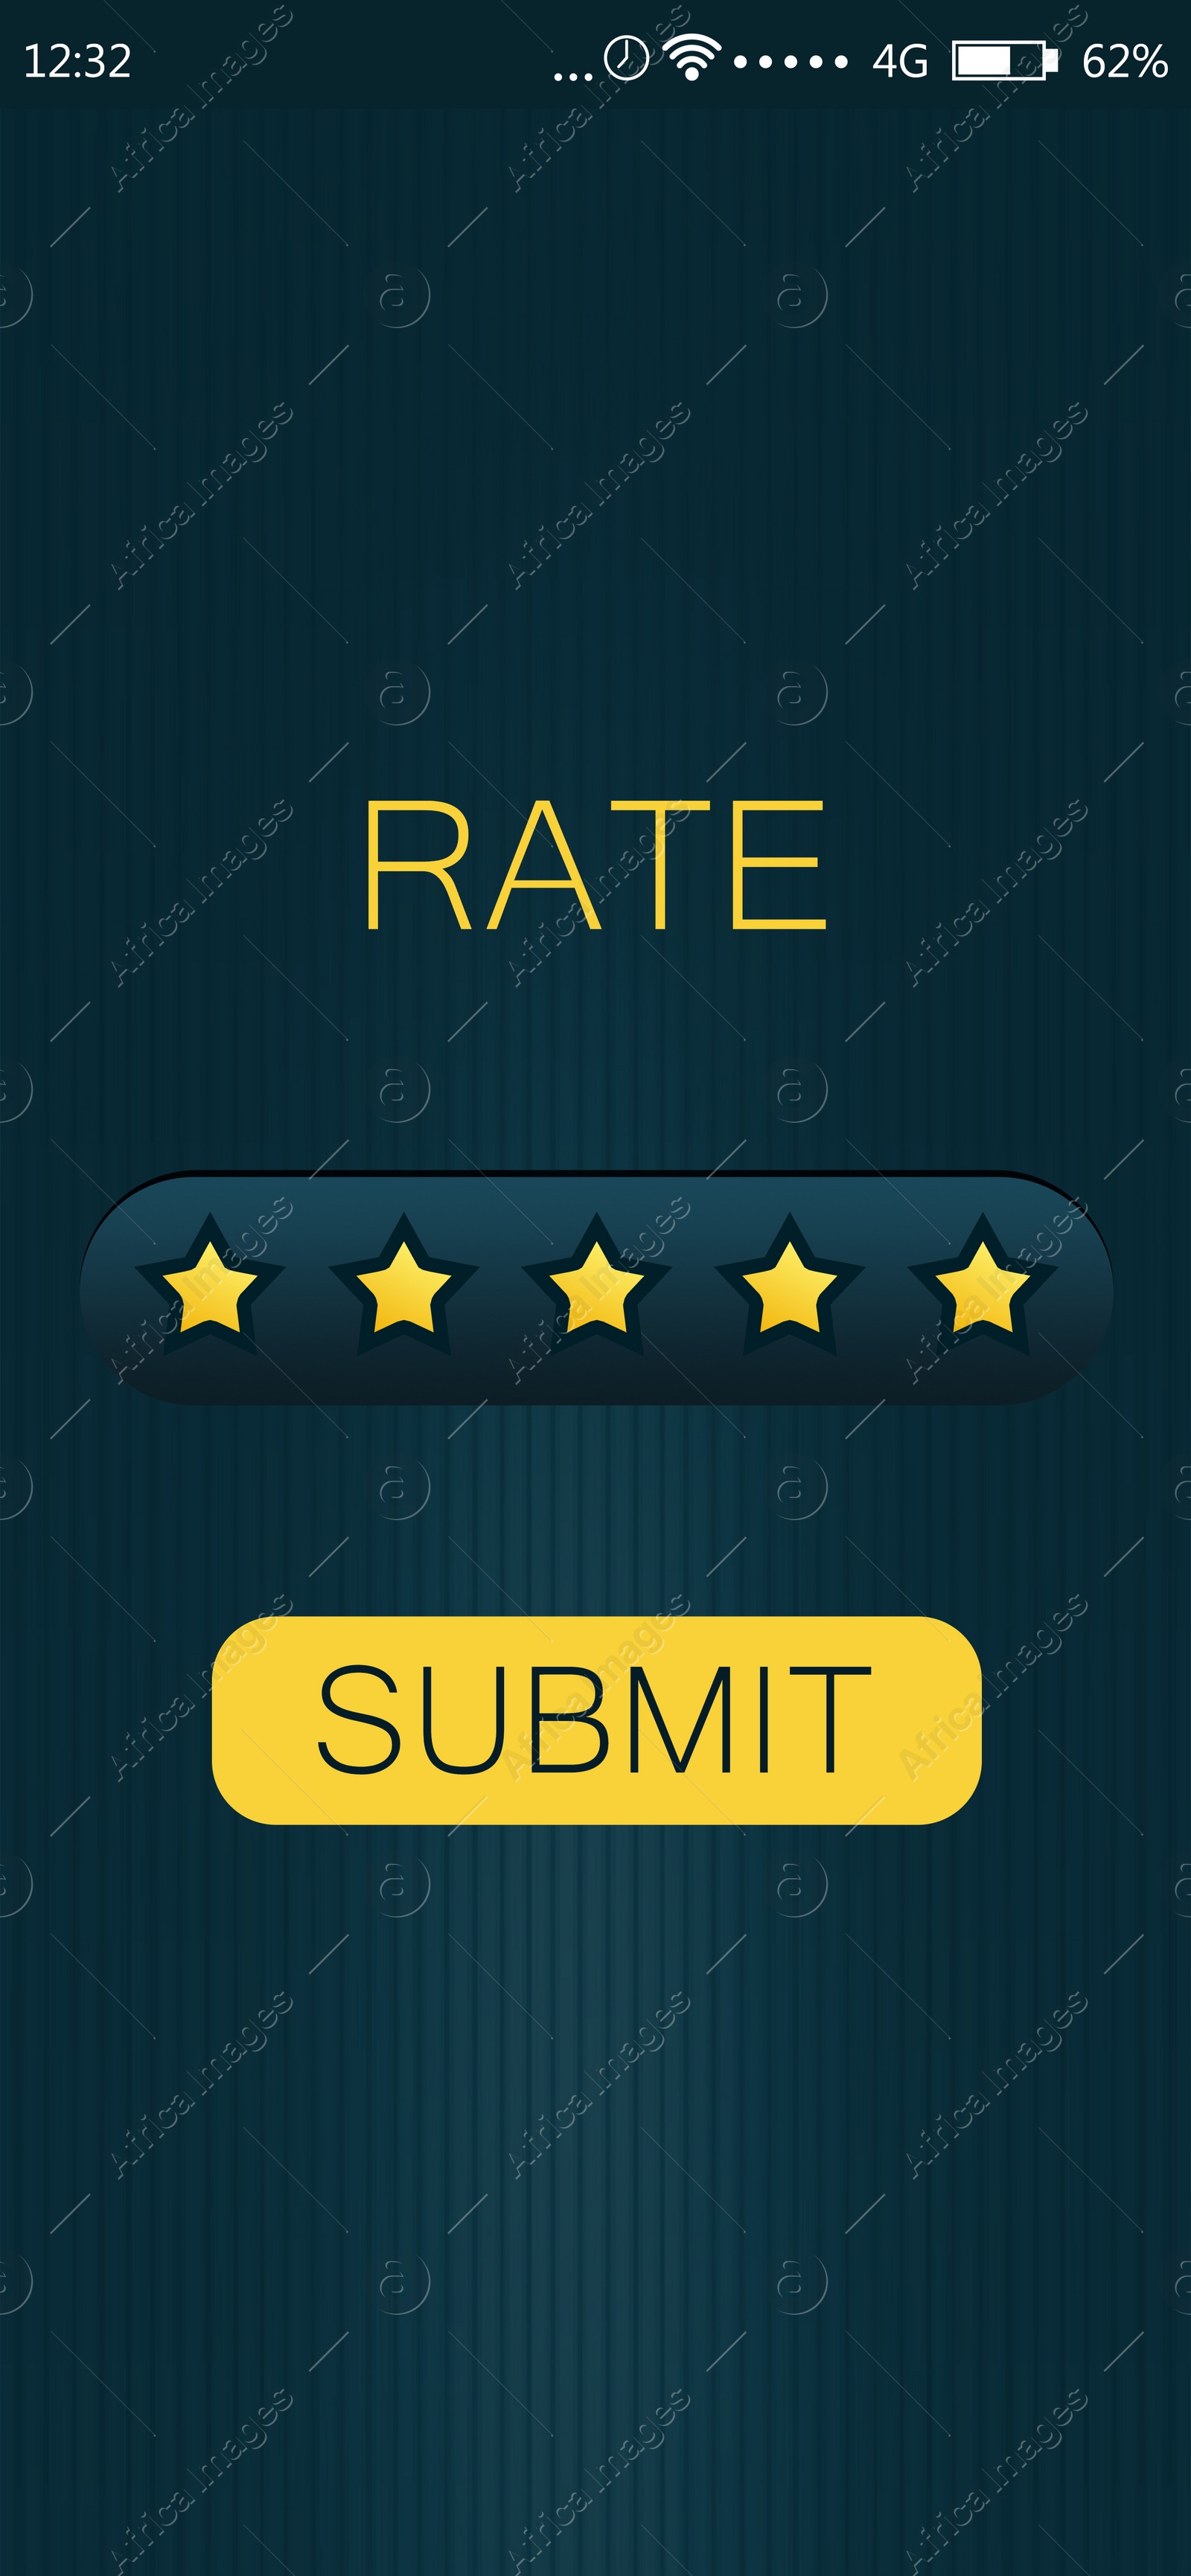 Illustration of Customer review on smartphone, illustration. Five stars quality rating